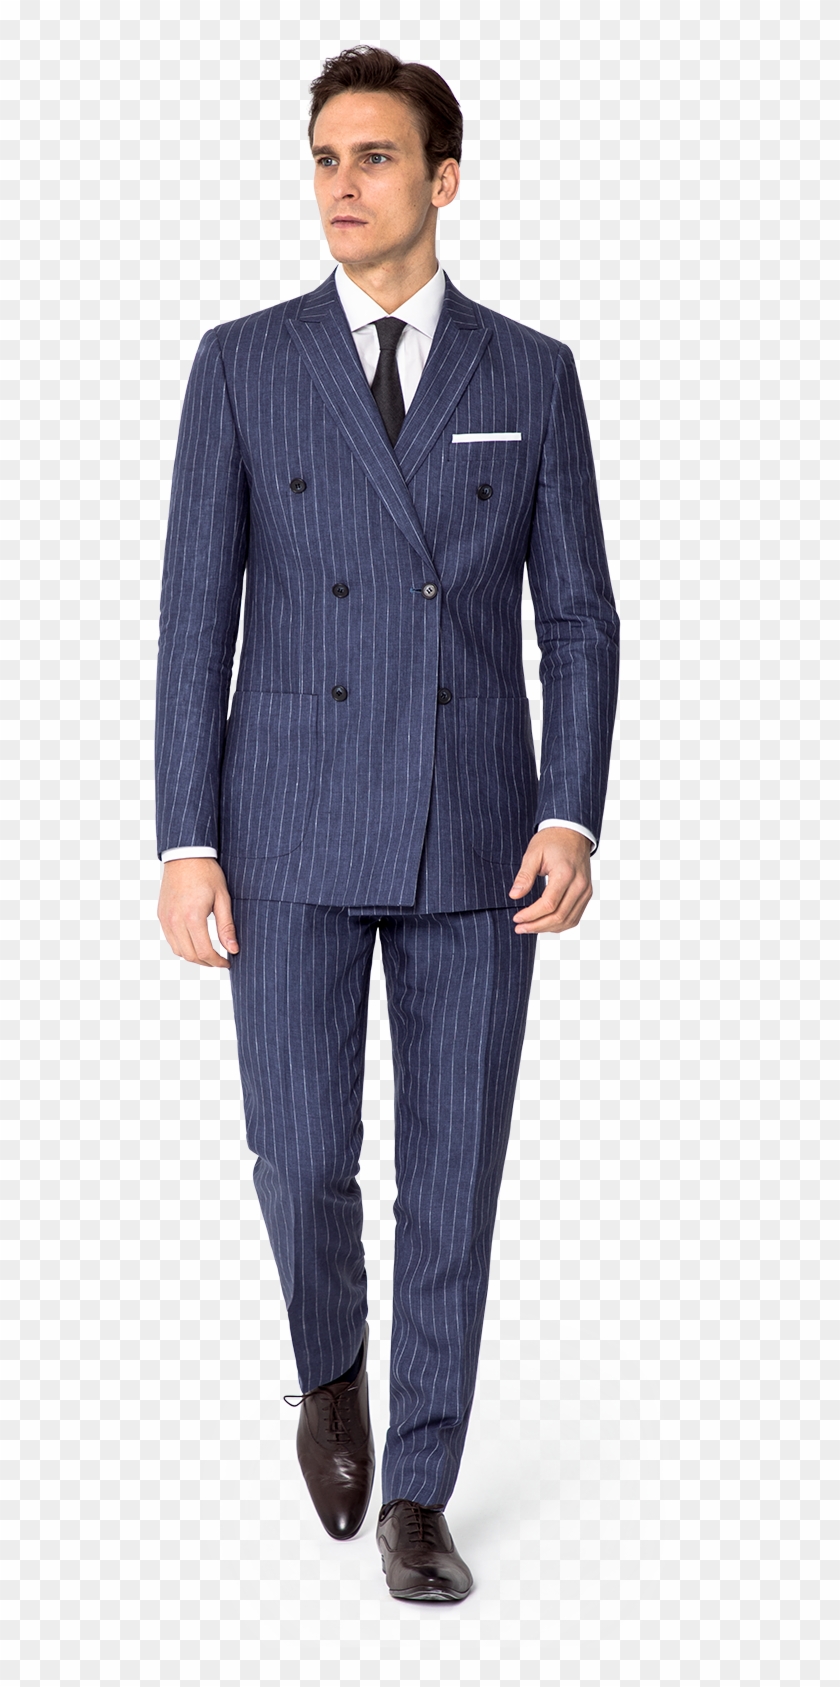 Blue Double Breasted Striped Linen Suit - Blue Checked Fabric Suit Clipart #5644990